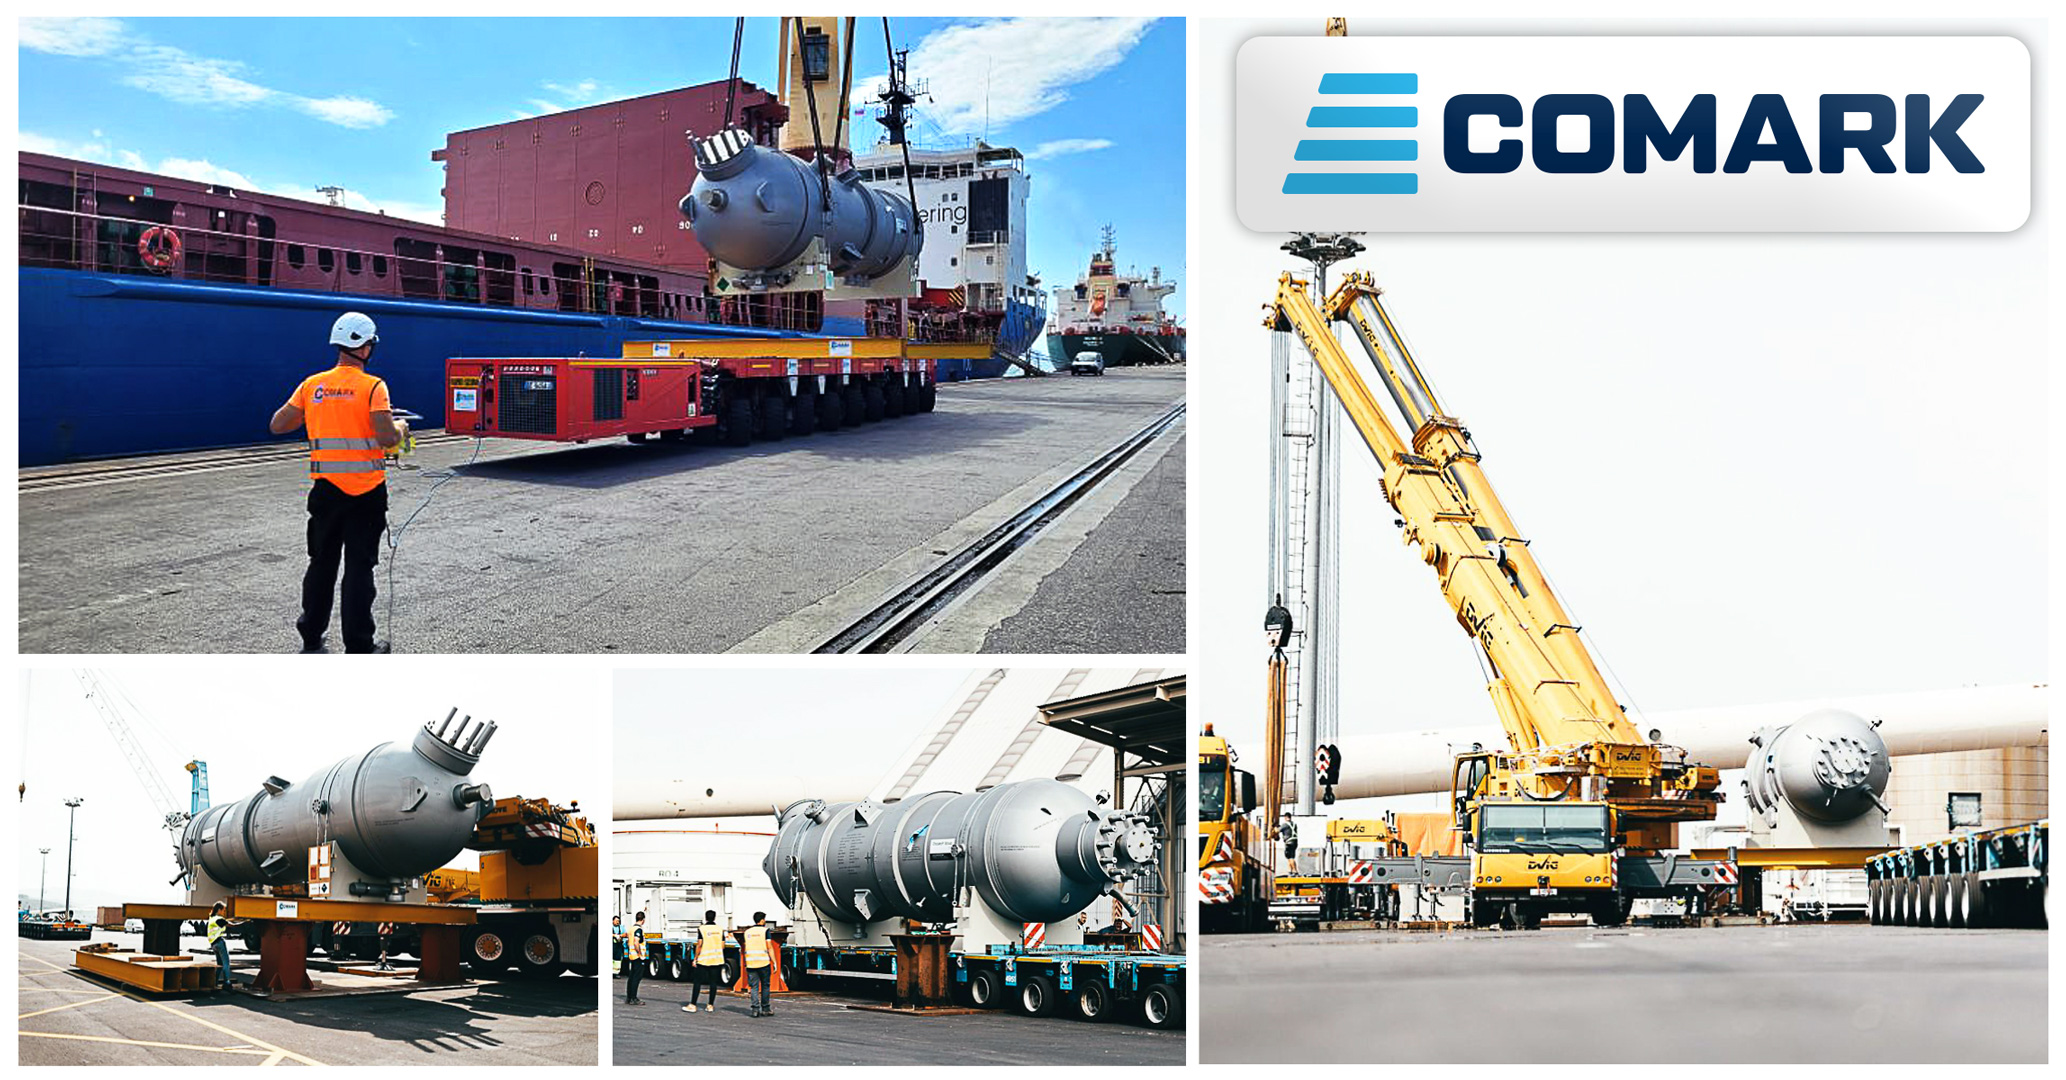 Comark Handled this Heavy Unit via Port of Koper (Luka Koper) with their Own Equipment, Including Transshipping, Warehousing & Final Delivery Underhook